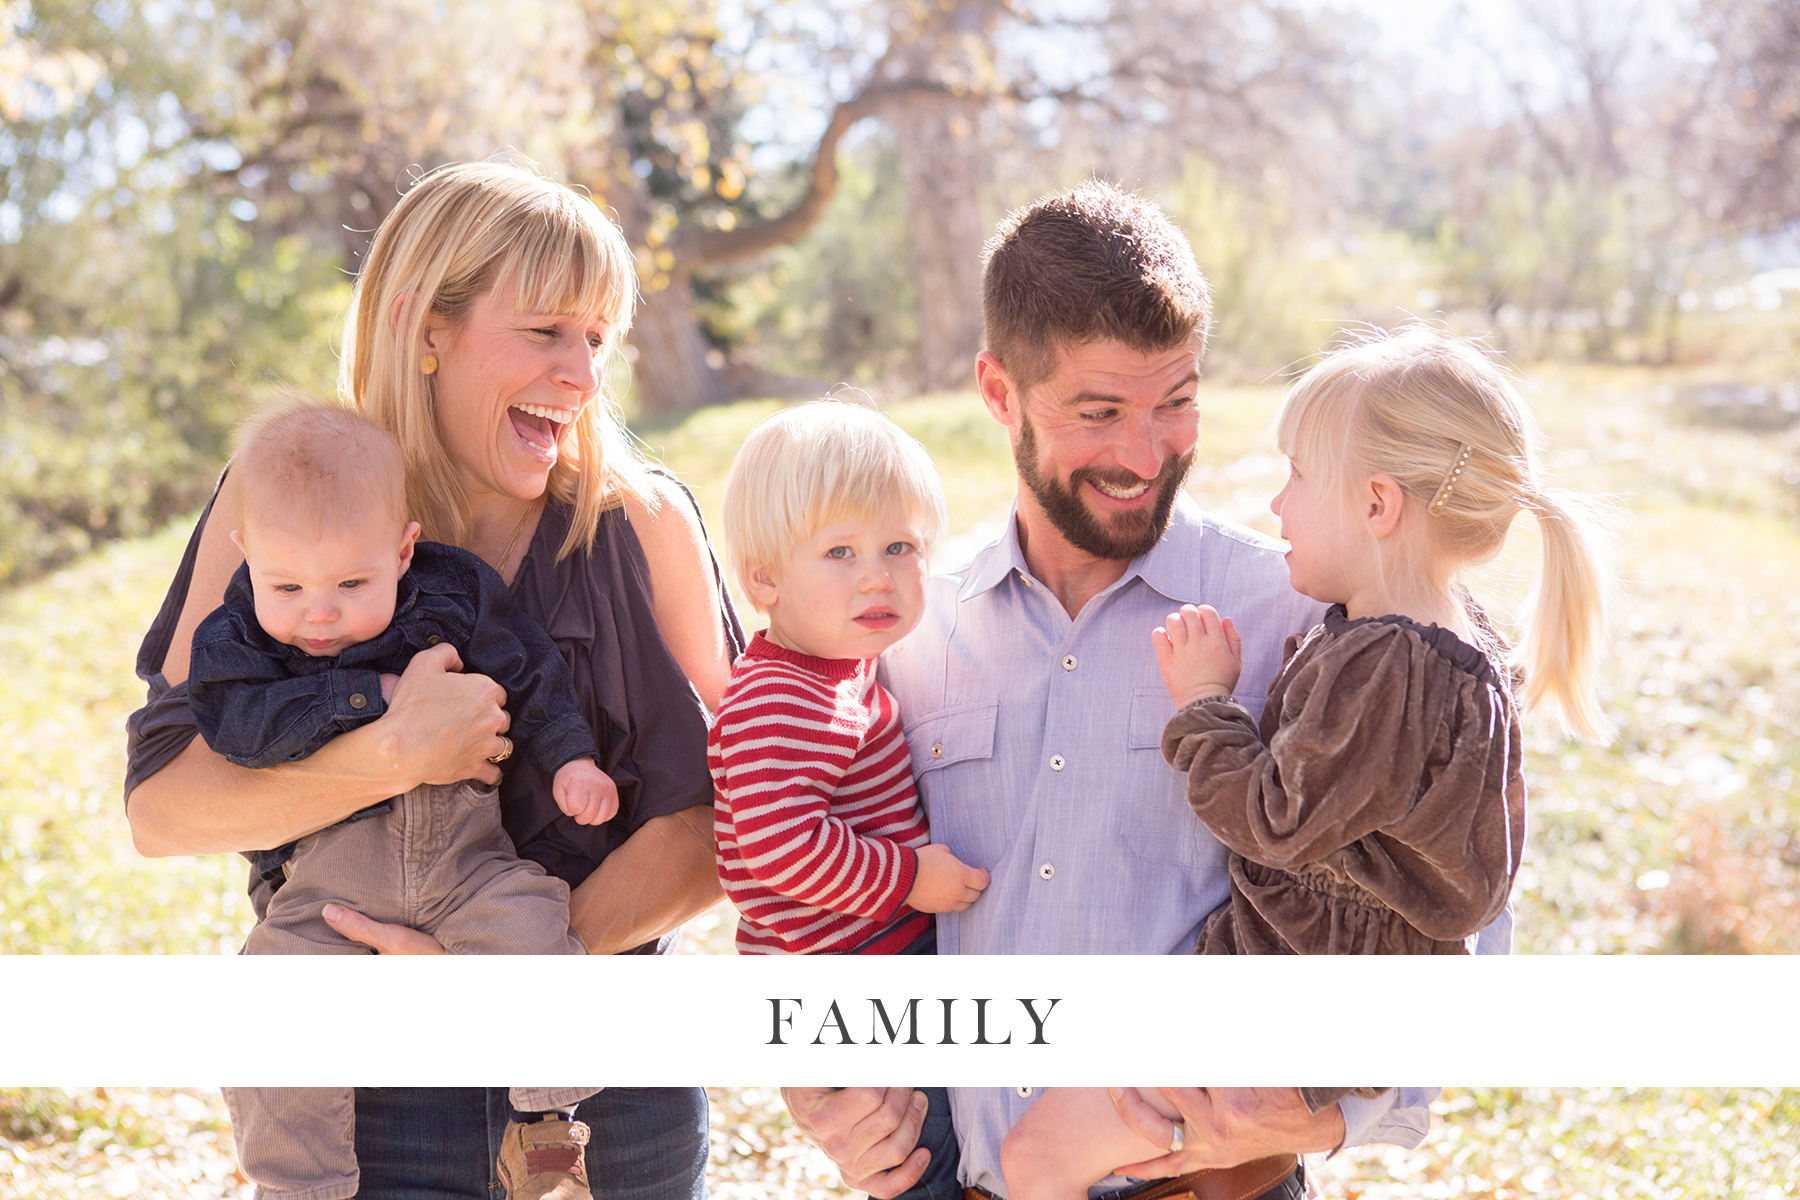 Boulder family photographer Jenni Maroney specializes in simple and natural family photography.